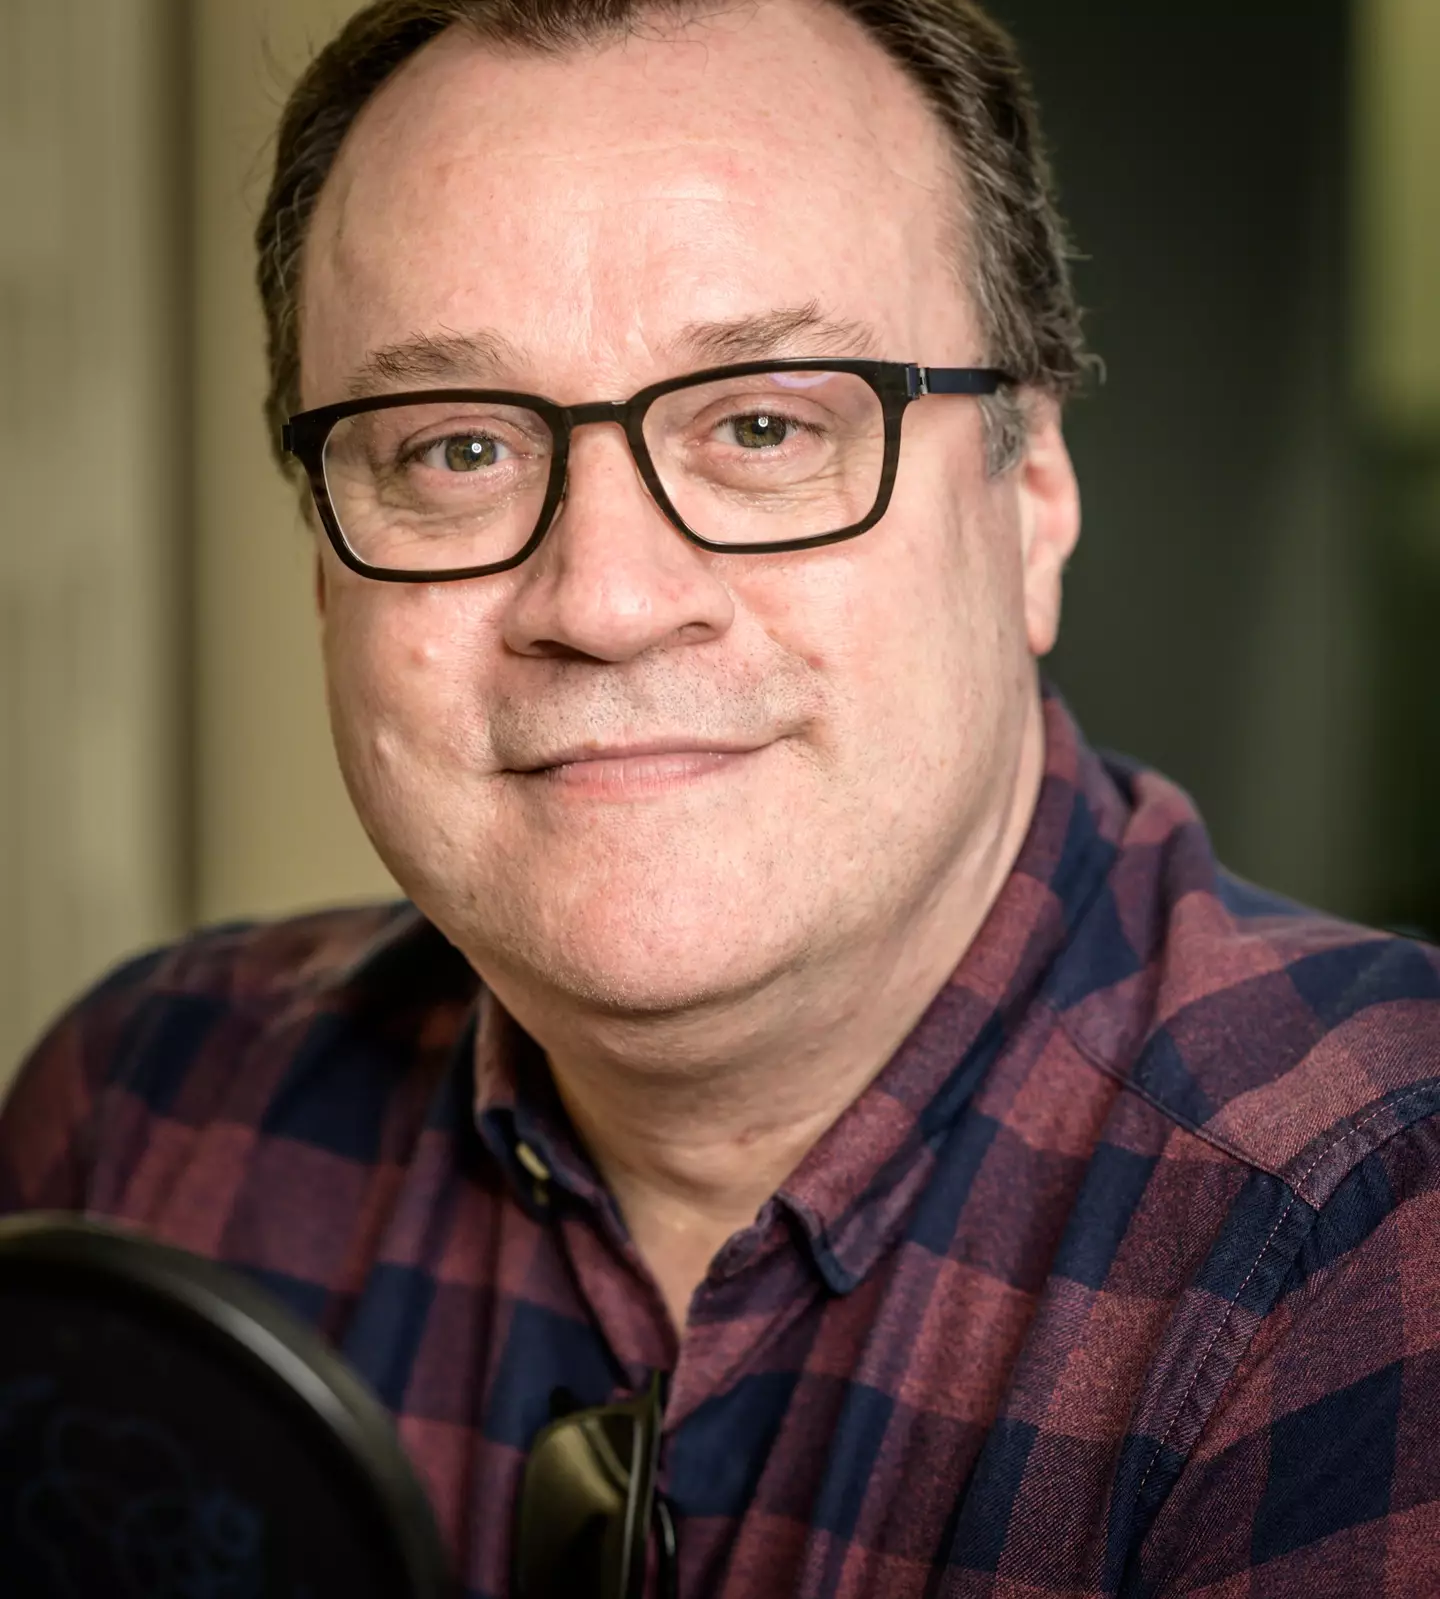 Russell T Davies will be showrunner for the new season.